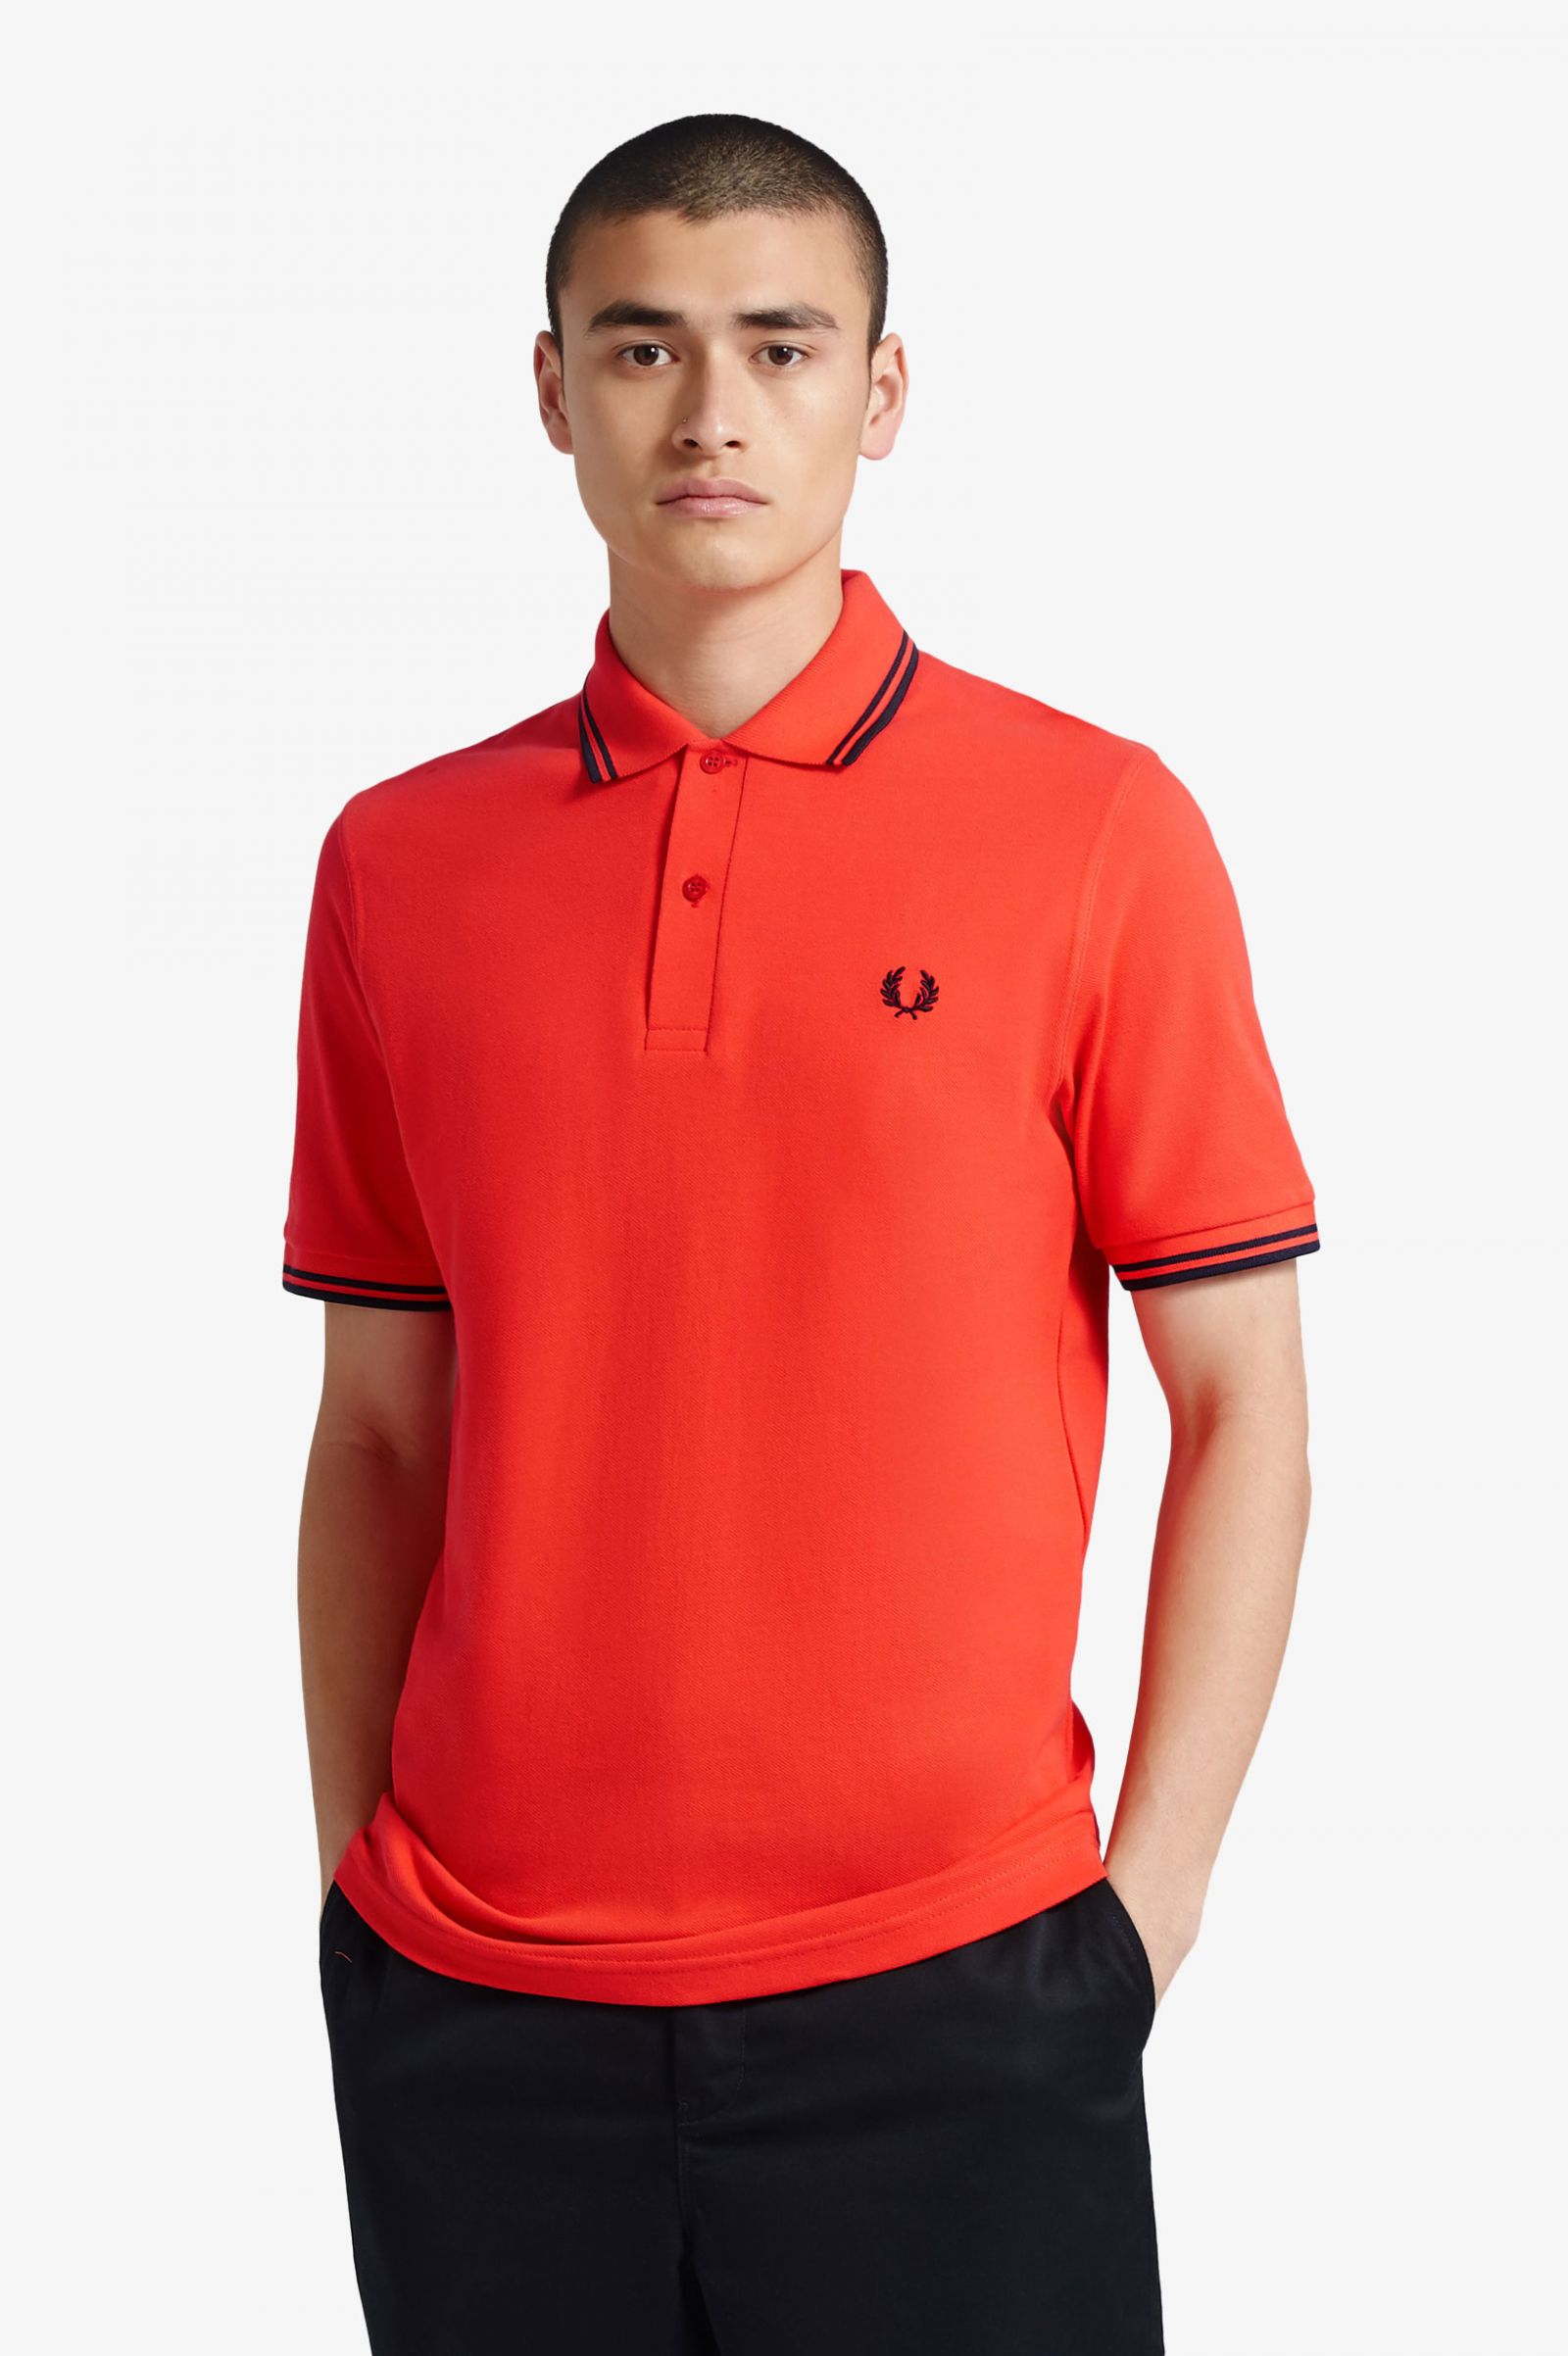 M12 - Lipstick Red / Black / Black | The Fred Perry Shirt | Men's Short ...